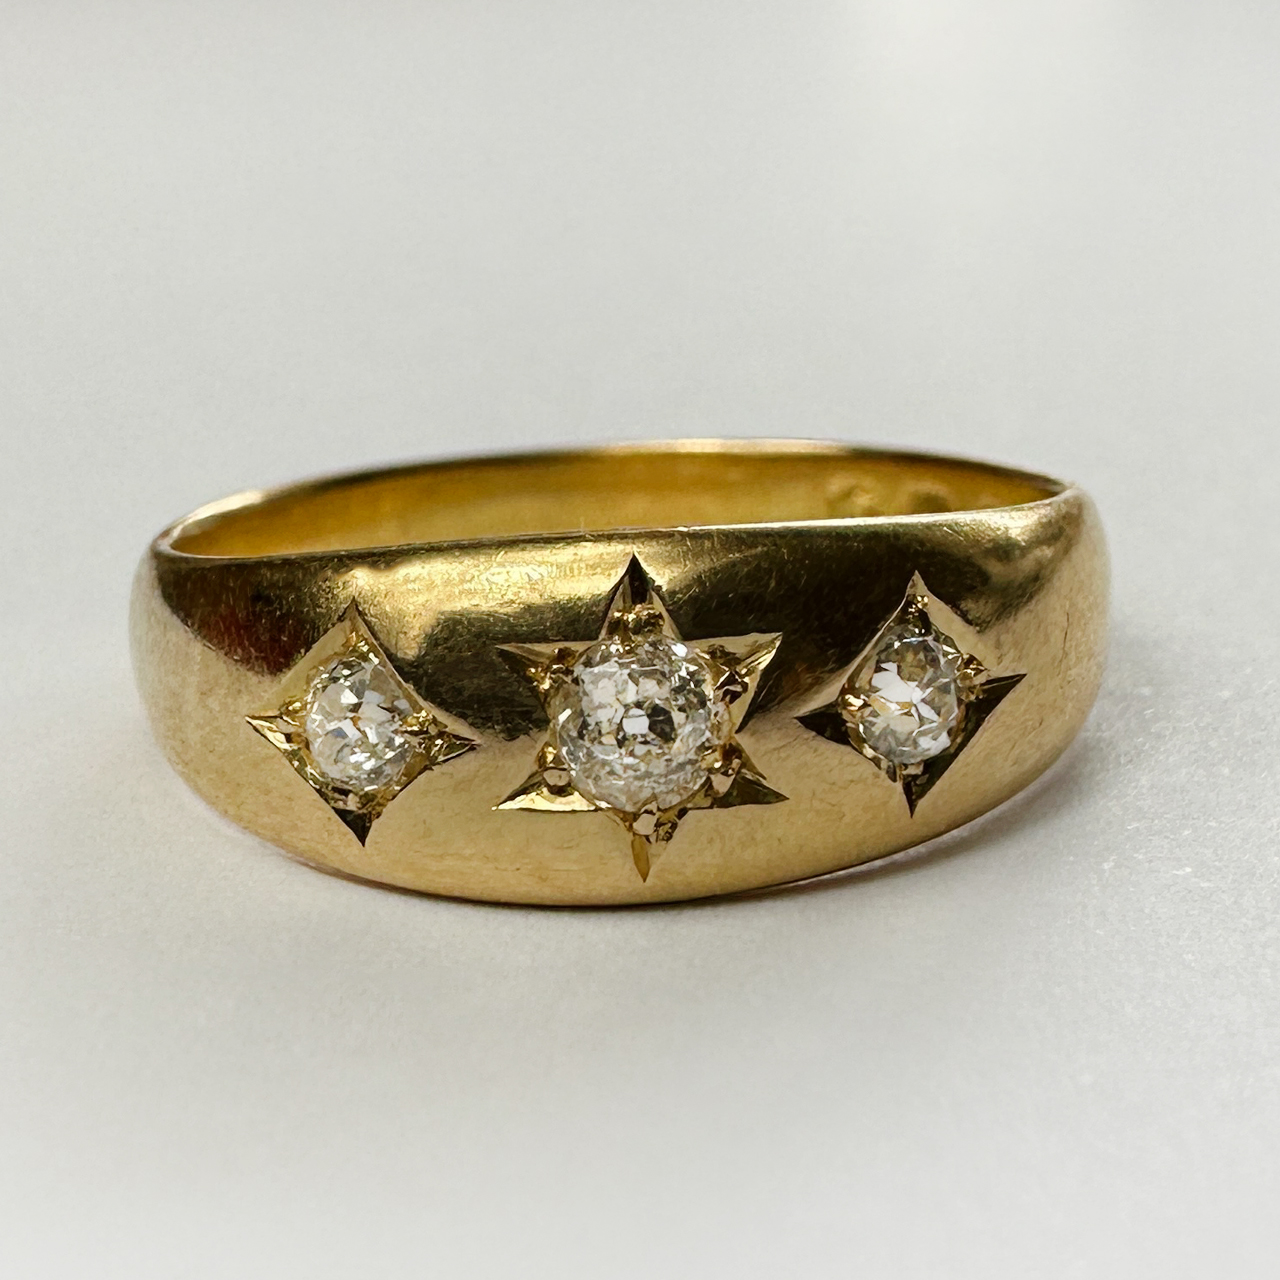 Beautifully Set Antique Diamond 3 Stone Gypsy Ring in 18ct hallmarked yellow gold.  Hallmarked Birmingham 1891 with makers mark S&E, ring size N. This is a lovey ring with full credentials and a beautiful patina.  This ring can be resized